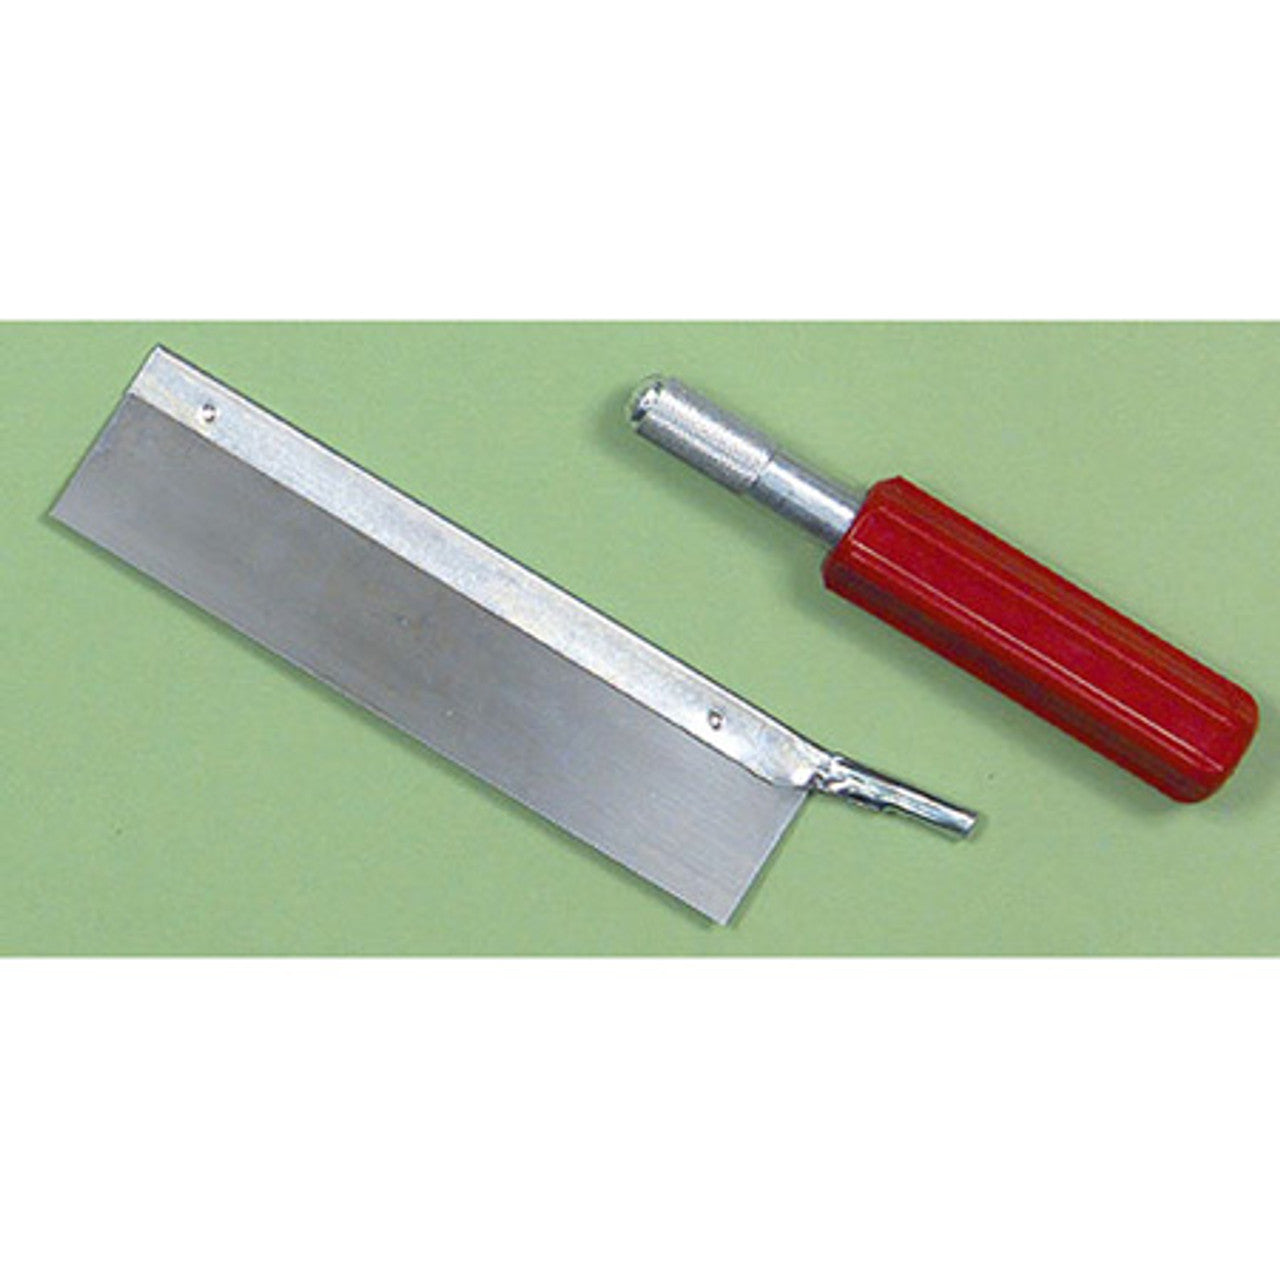 EXCEL - Razor Saw Set, Handle and 1 Blade, Carded | Grognard Games